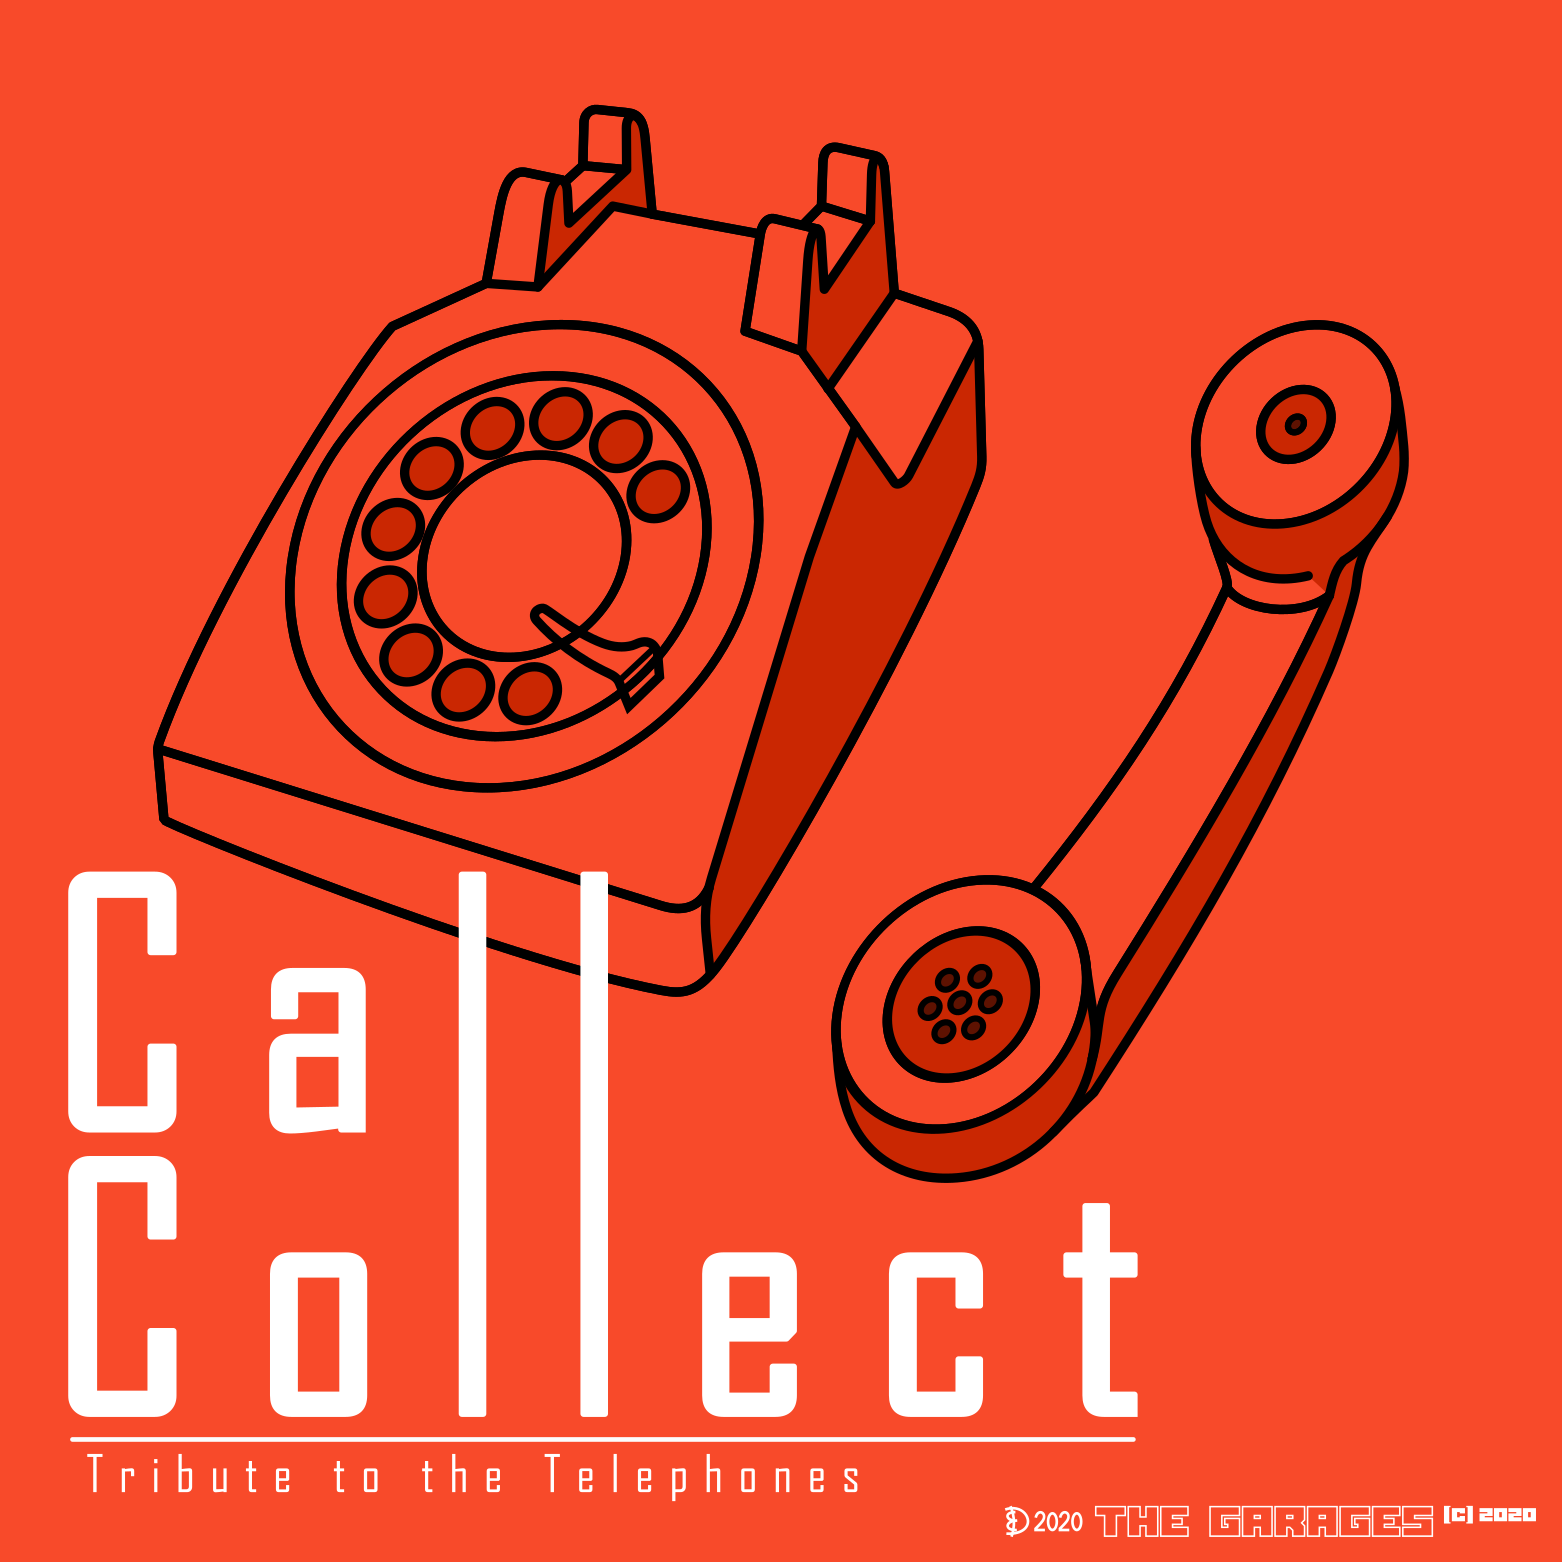 A line drawing of an old rotary phone with the reciever resting upright next to it. The title Call Collect is written on top, with the l's connected vertically.